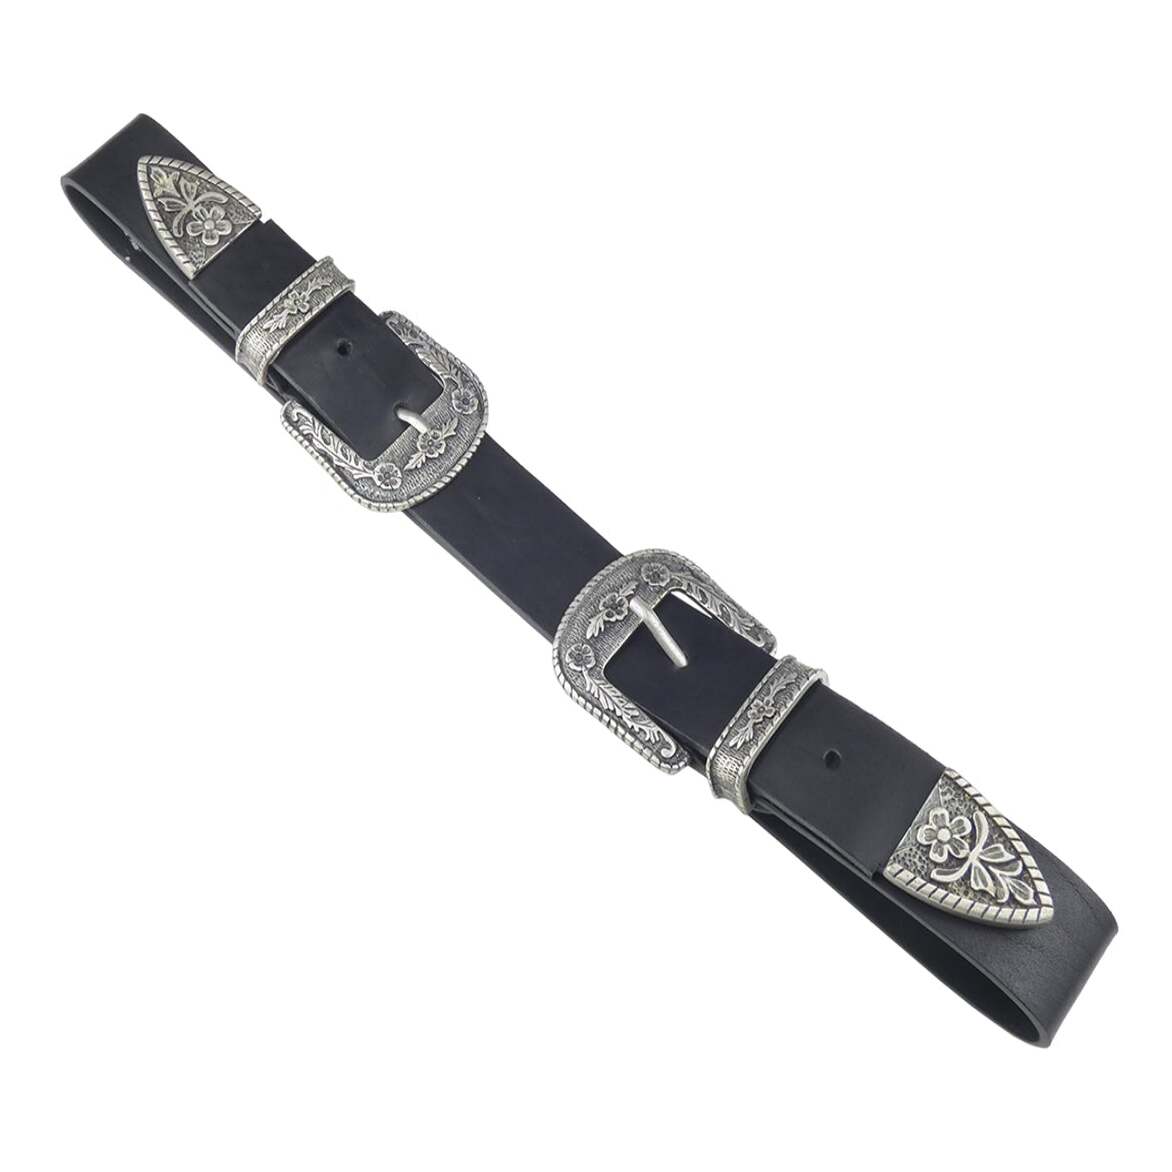 Gaudì Belt in Black Leather with Gold and Antique Silver Buckles